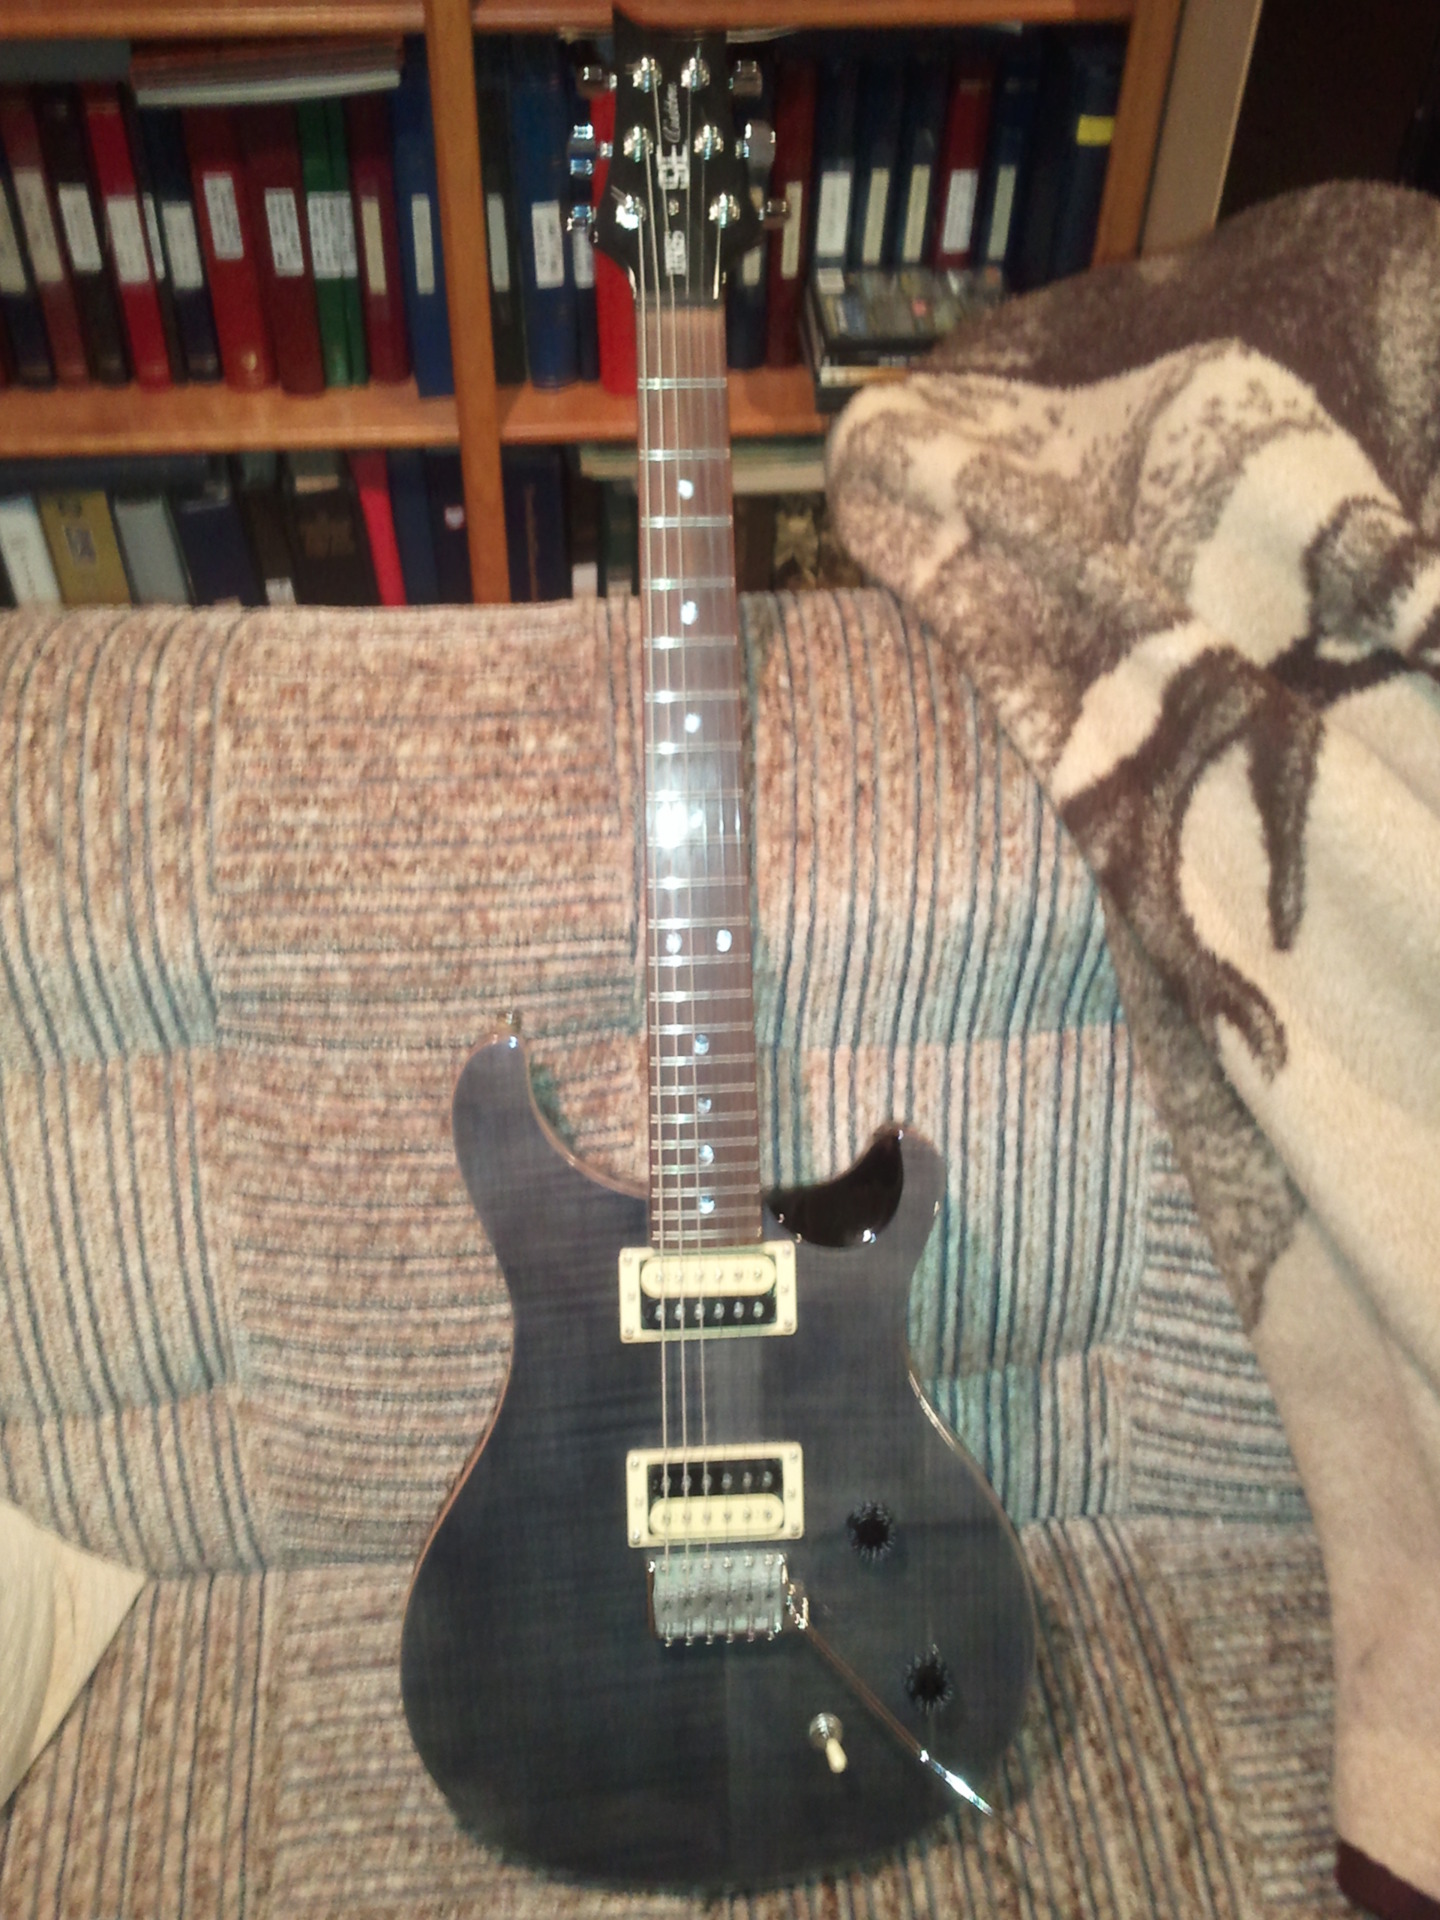  My PRS, probably my most played guitar.  Completely awesome all around.  I love it!